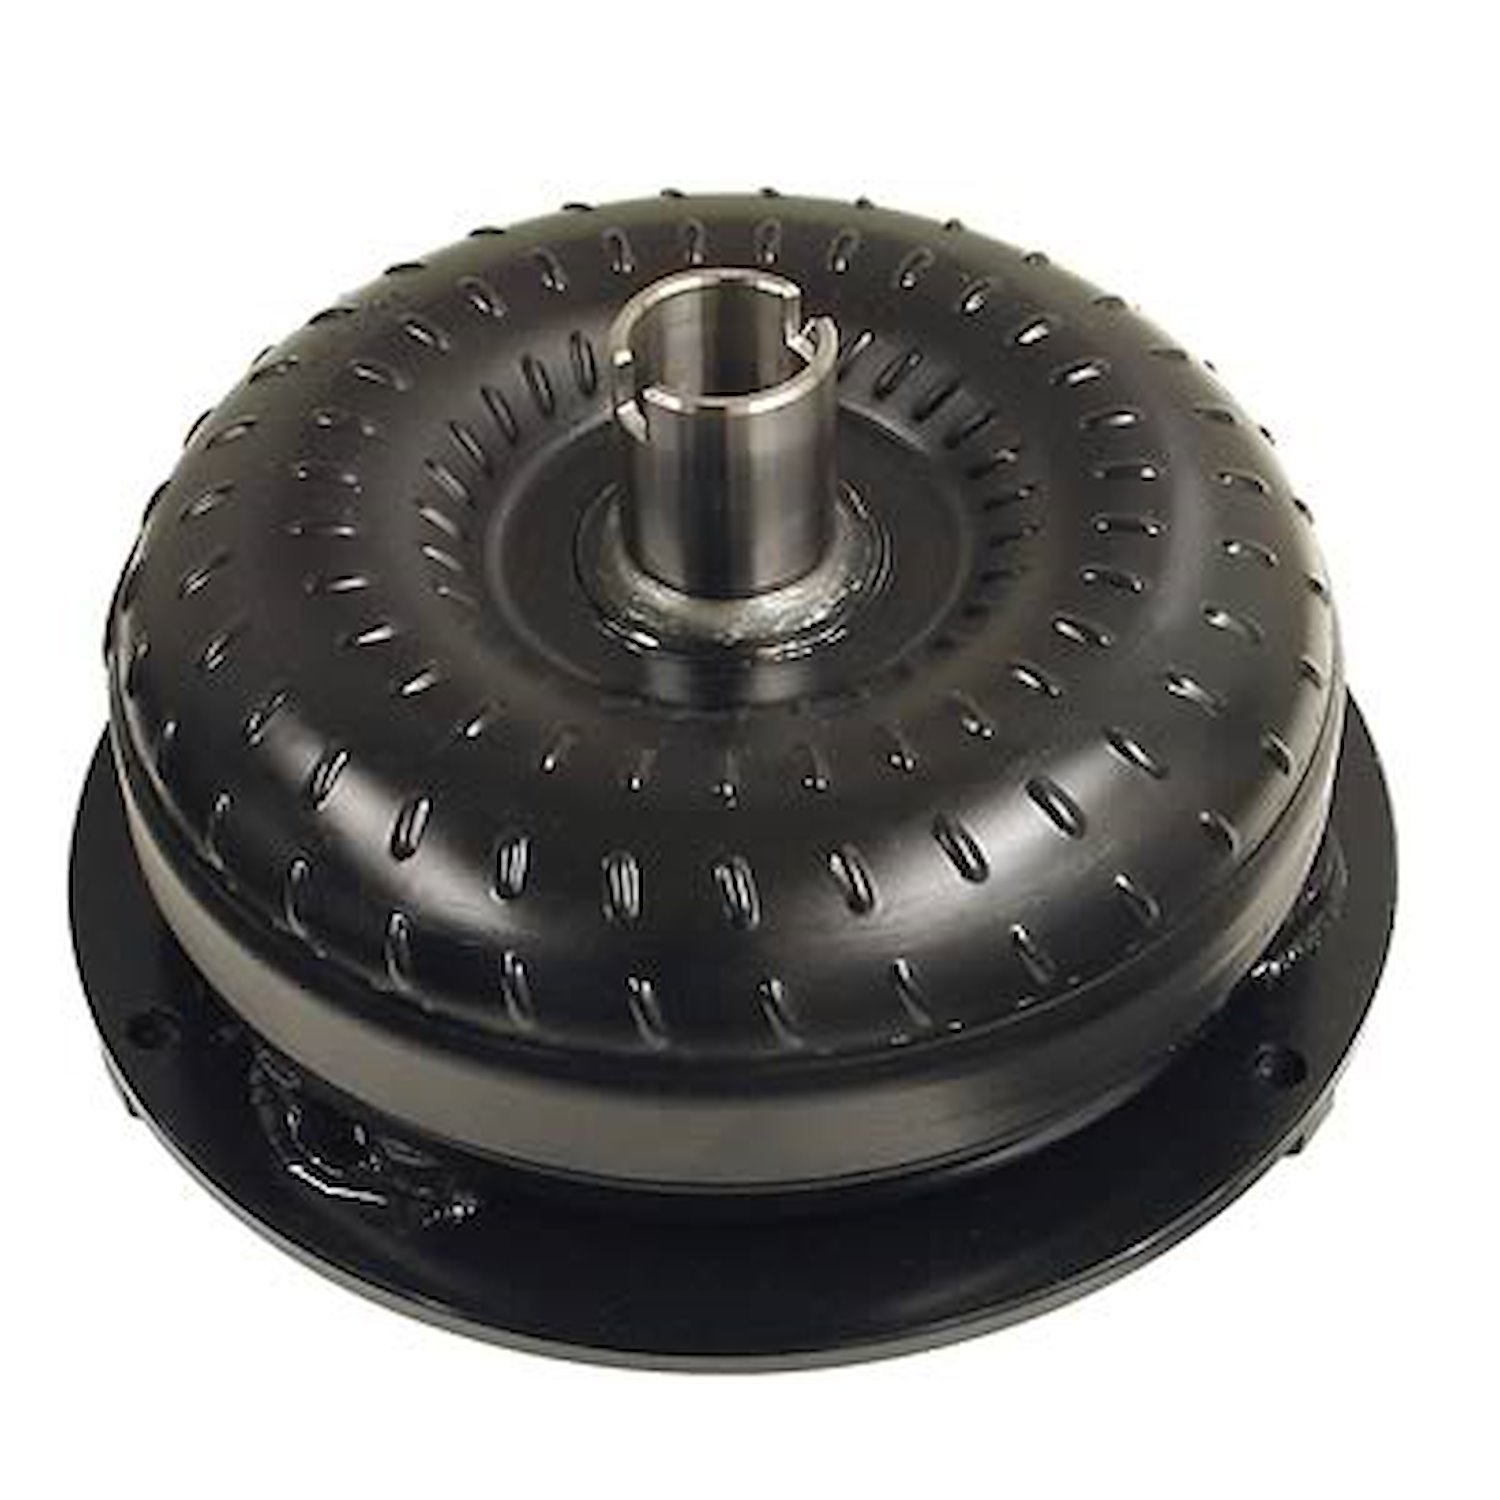 408340 Torque Converters, GM TH50 & TH400 Streetmaster Torque Converter - Stage 2